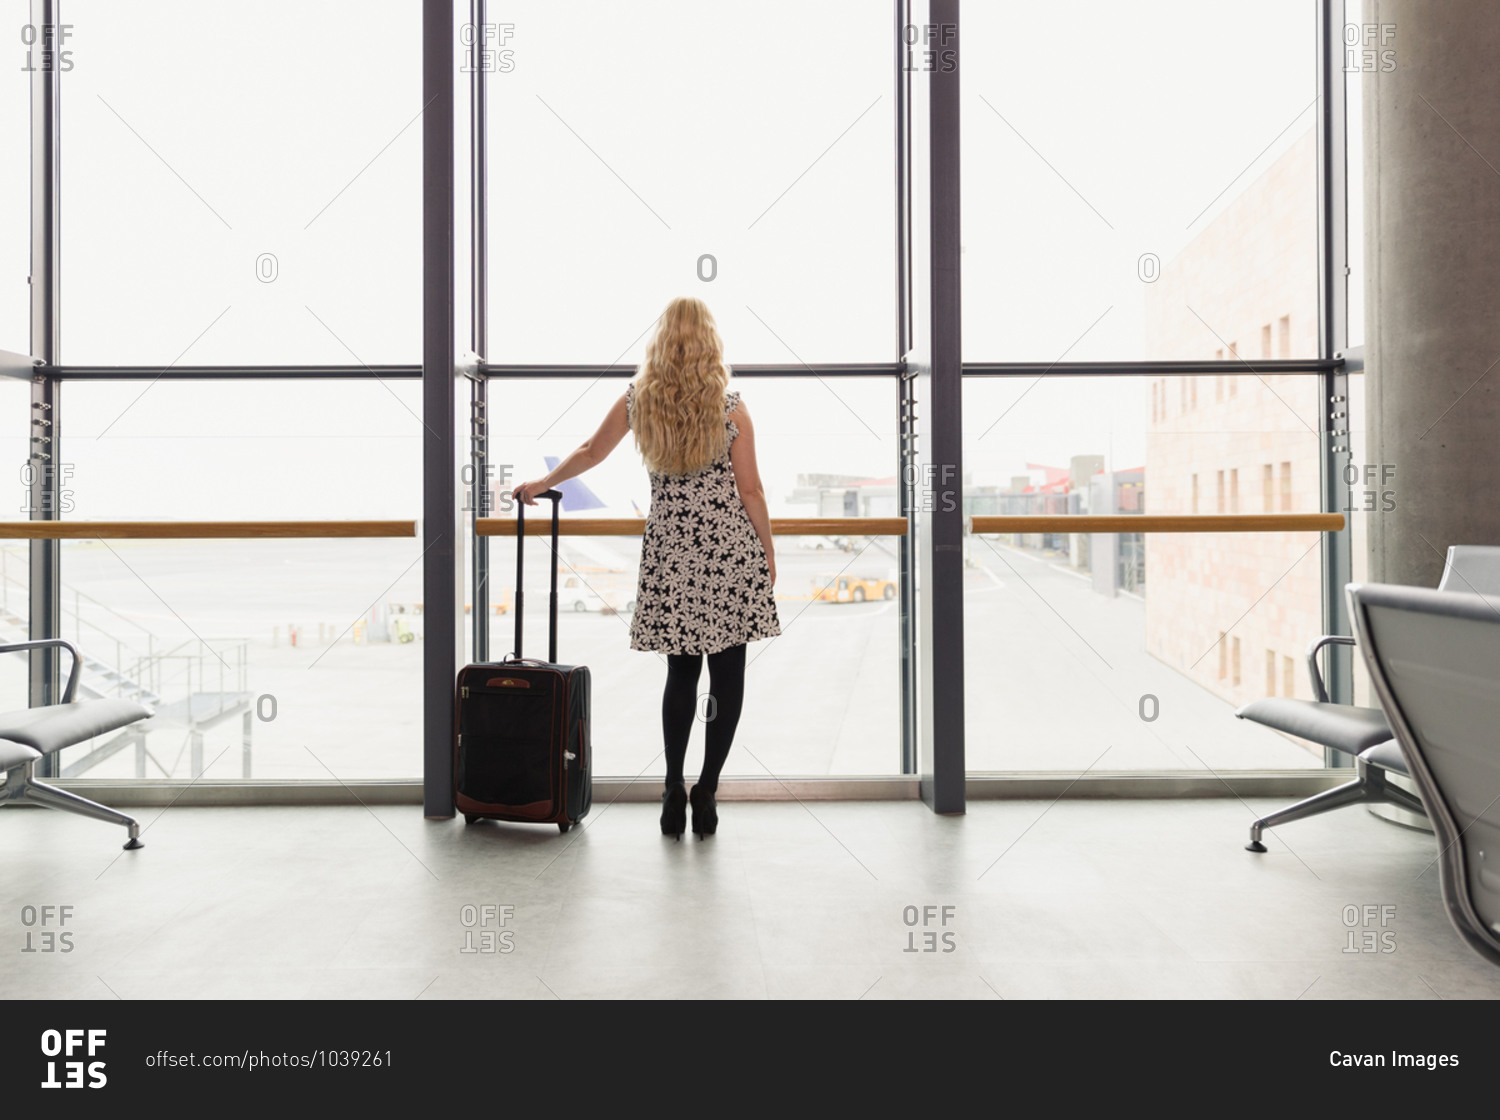 Female traveler with luggage standing in airport